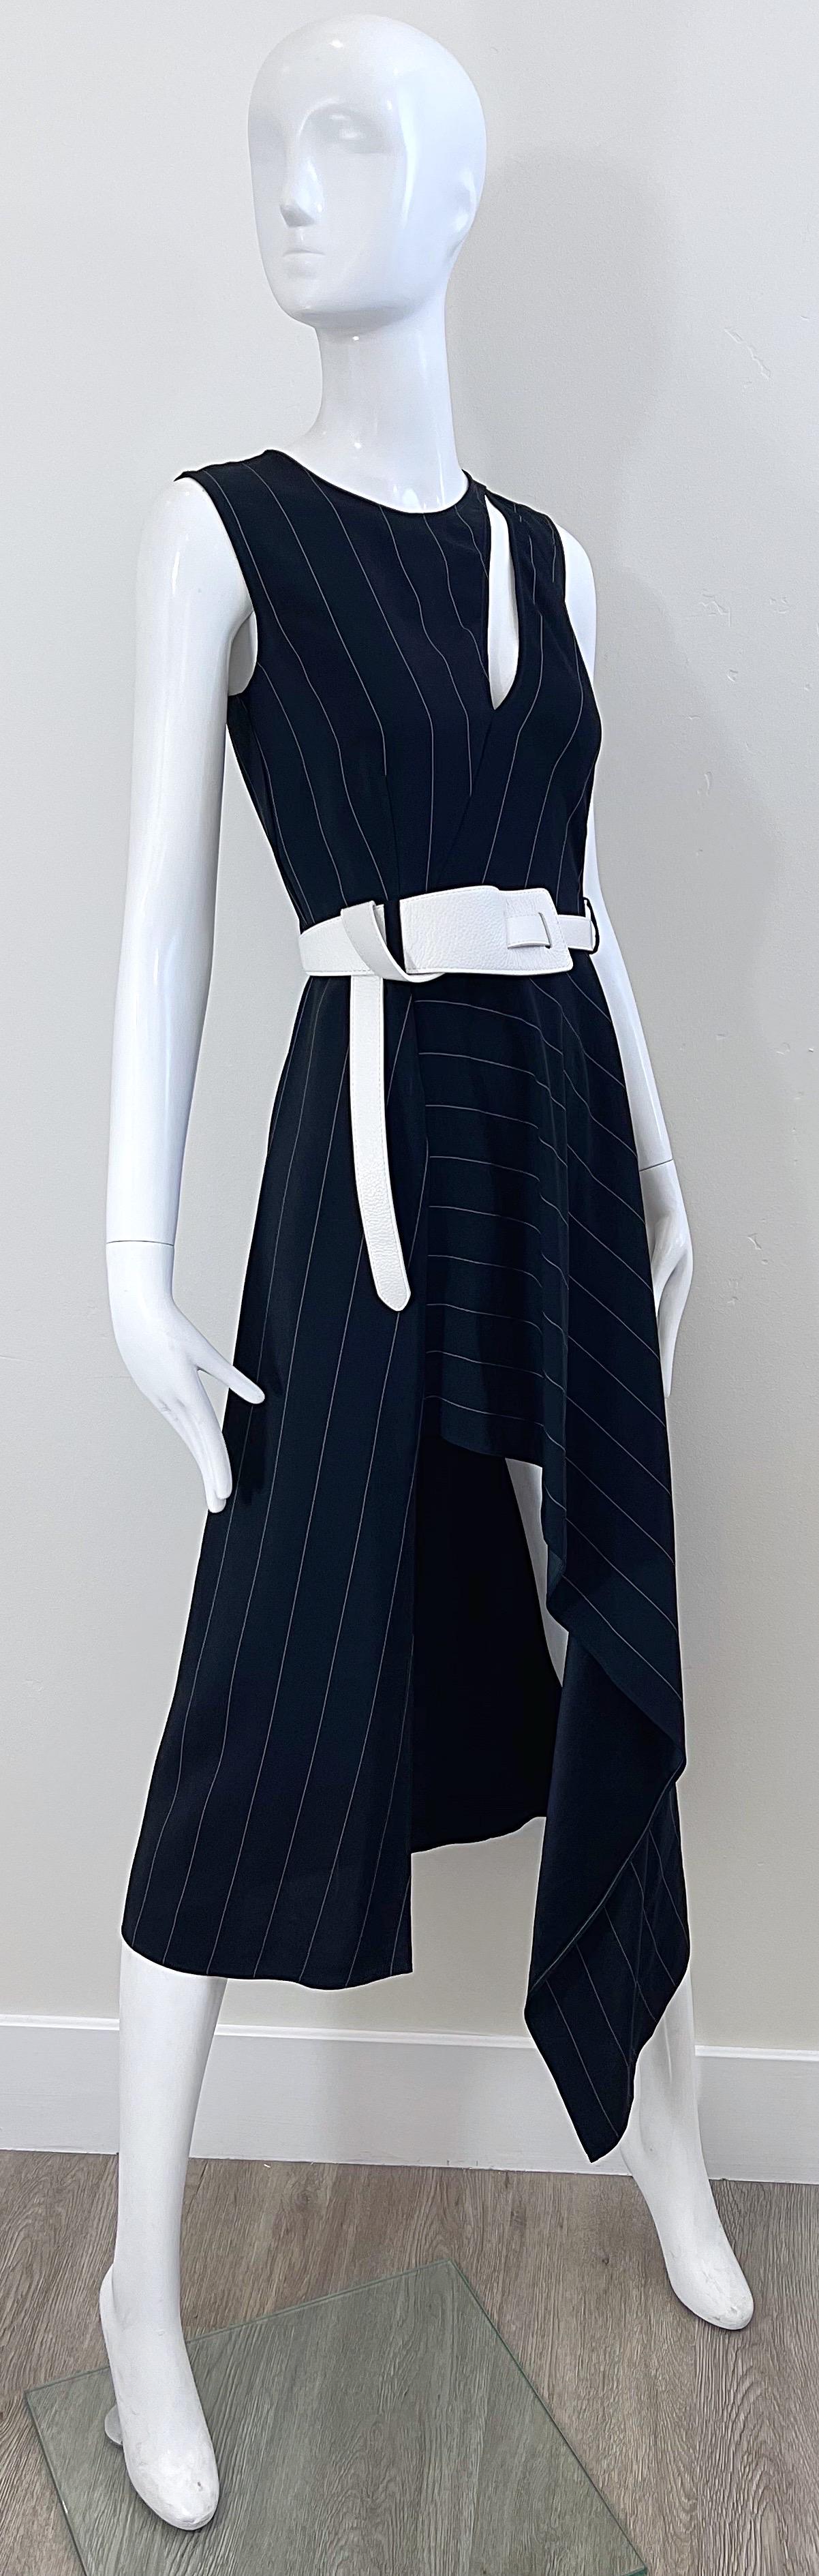 Women's 2000s Thierry Mugler Black and White Size 38 / 6 Pinstripe Hi-Lo Vintage Dress For Sale